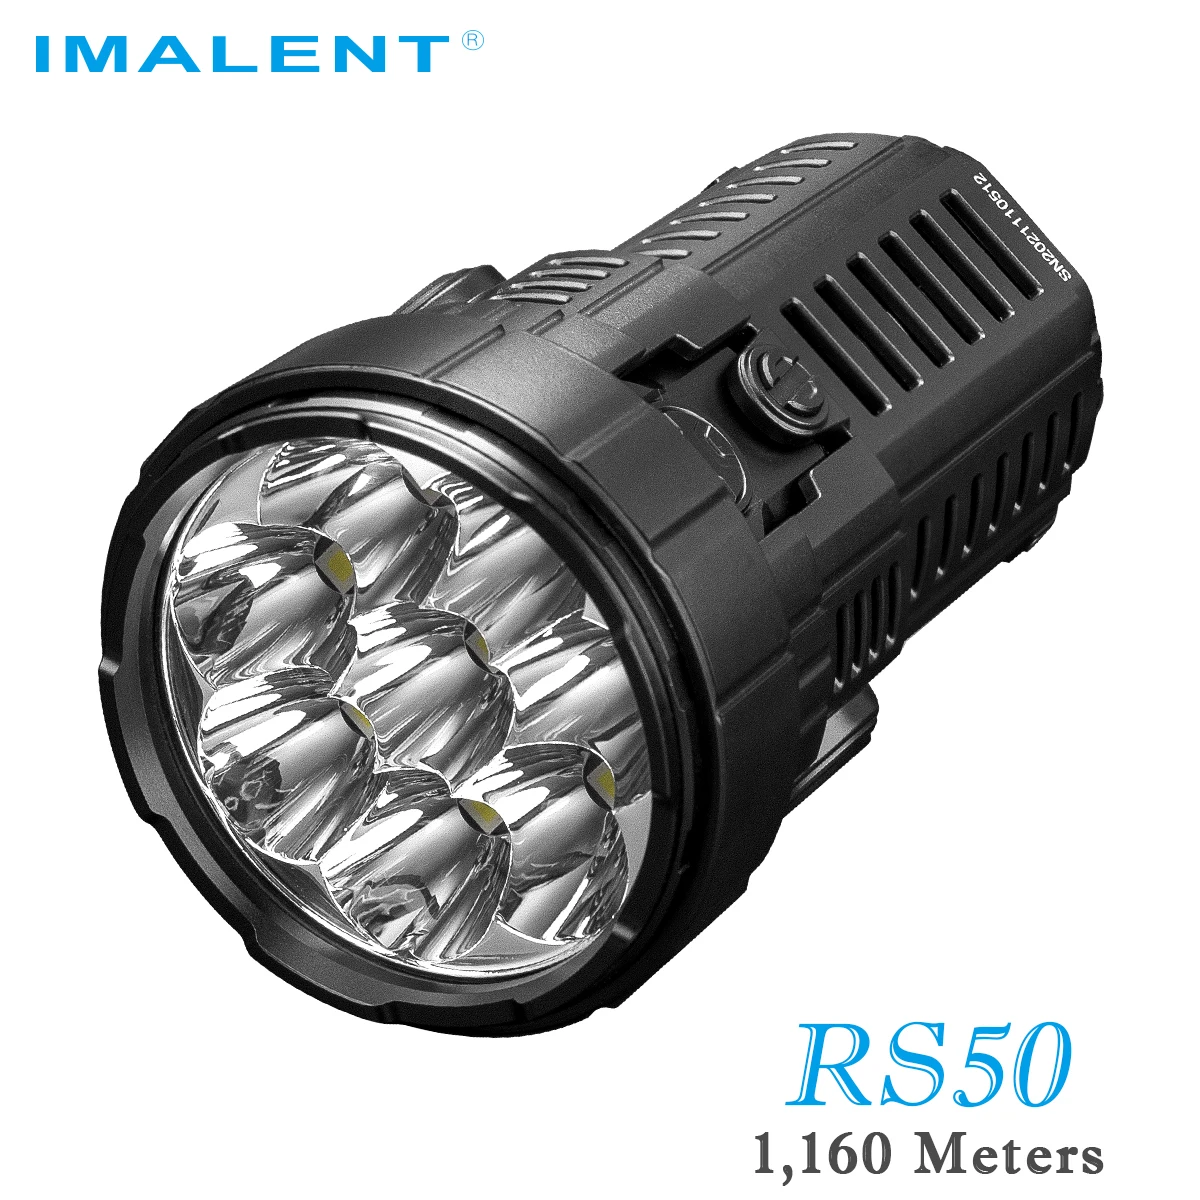 

IMALENT RS50 Flashlight High Bright Powerful 20000 Lumens CREE XHP50.3 HI LED 1160 Meters Outdoor Searching Lighting Torch